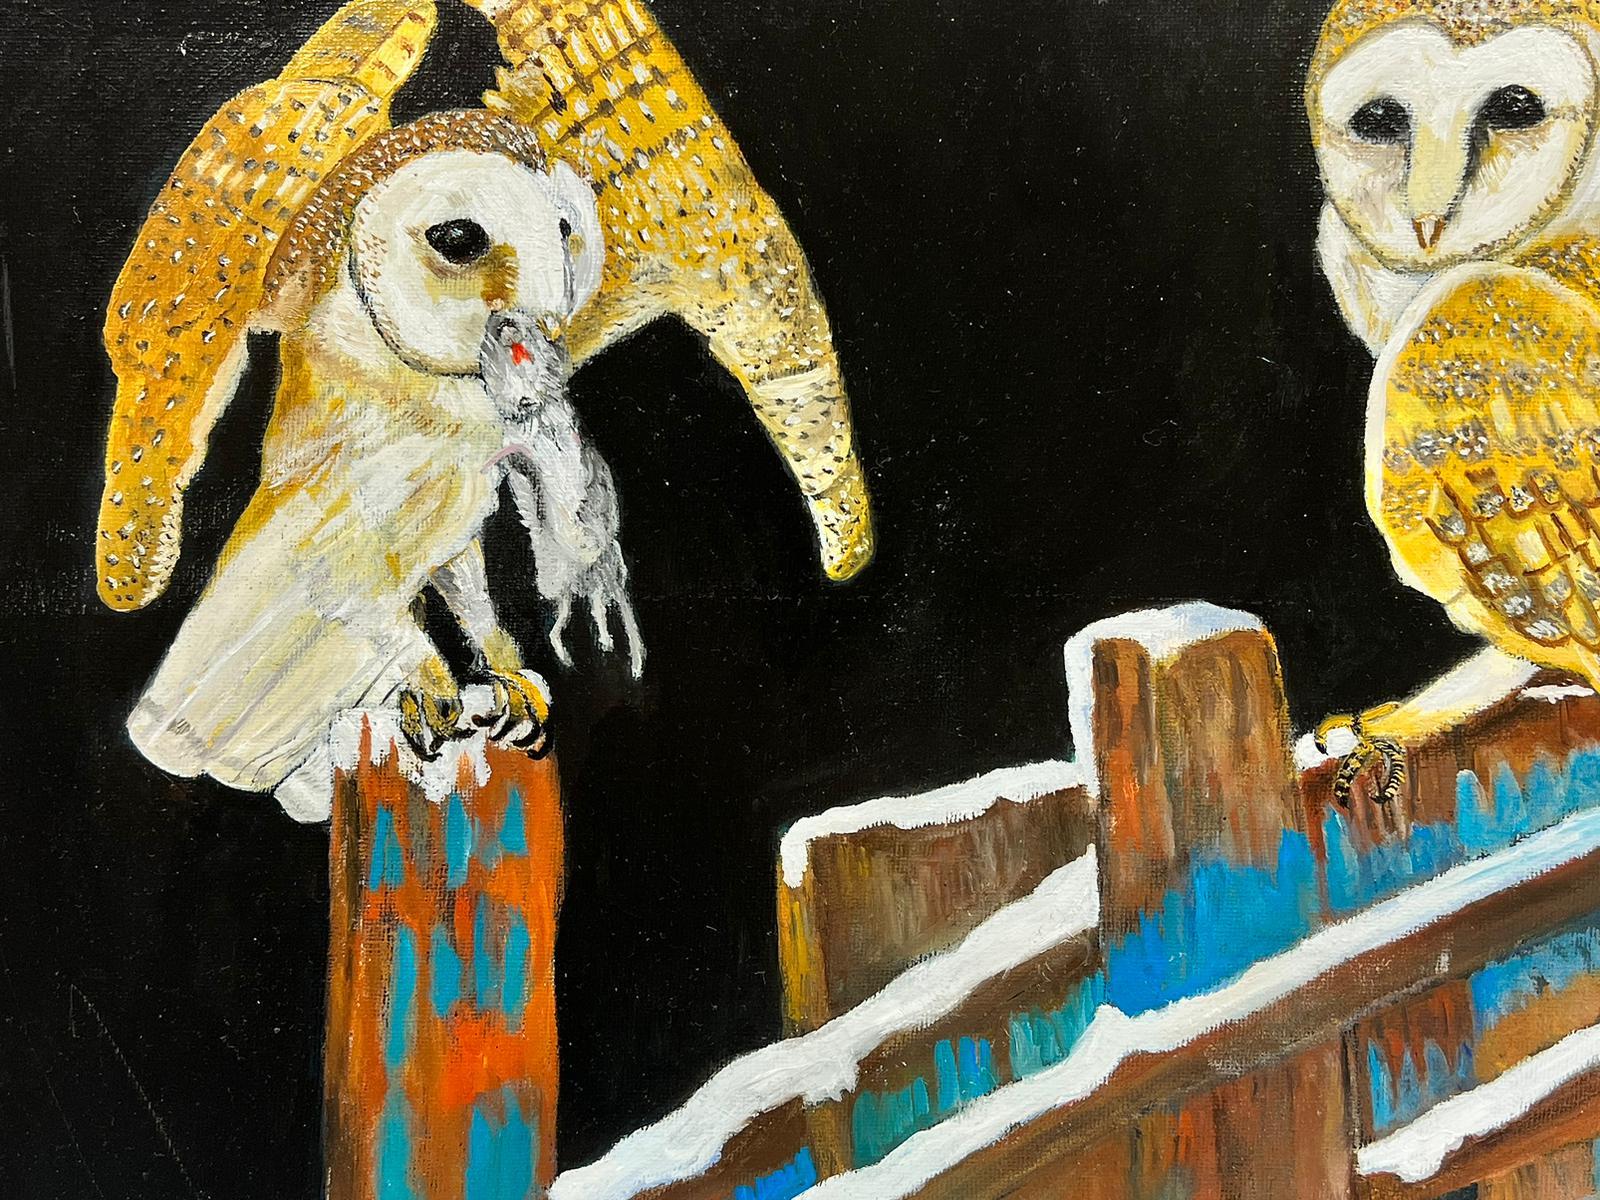 2 Owls
by Ben George Powell, British contemporary artist
signed
acrylic on canvas, unframed
canvas: 16 x 20 inches
provenance: private collection of this artists work, UK
The painting is in very good and presentable condition.
